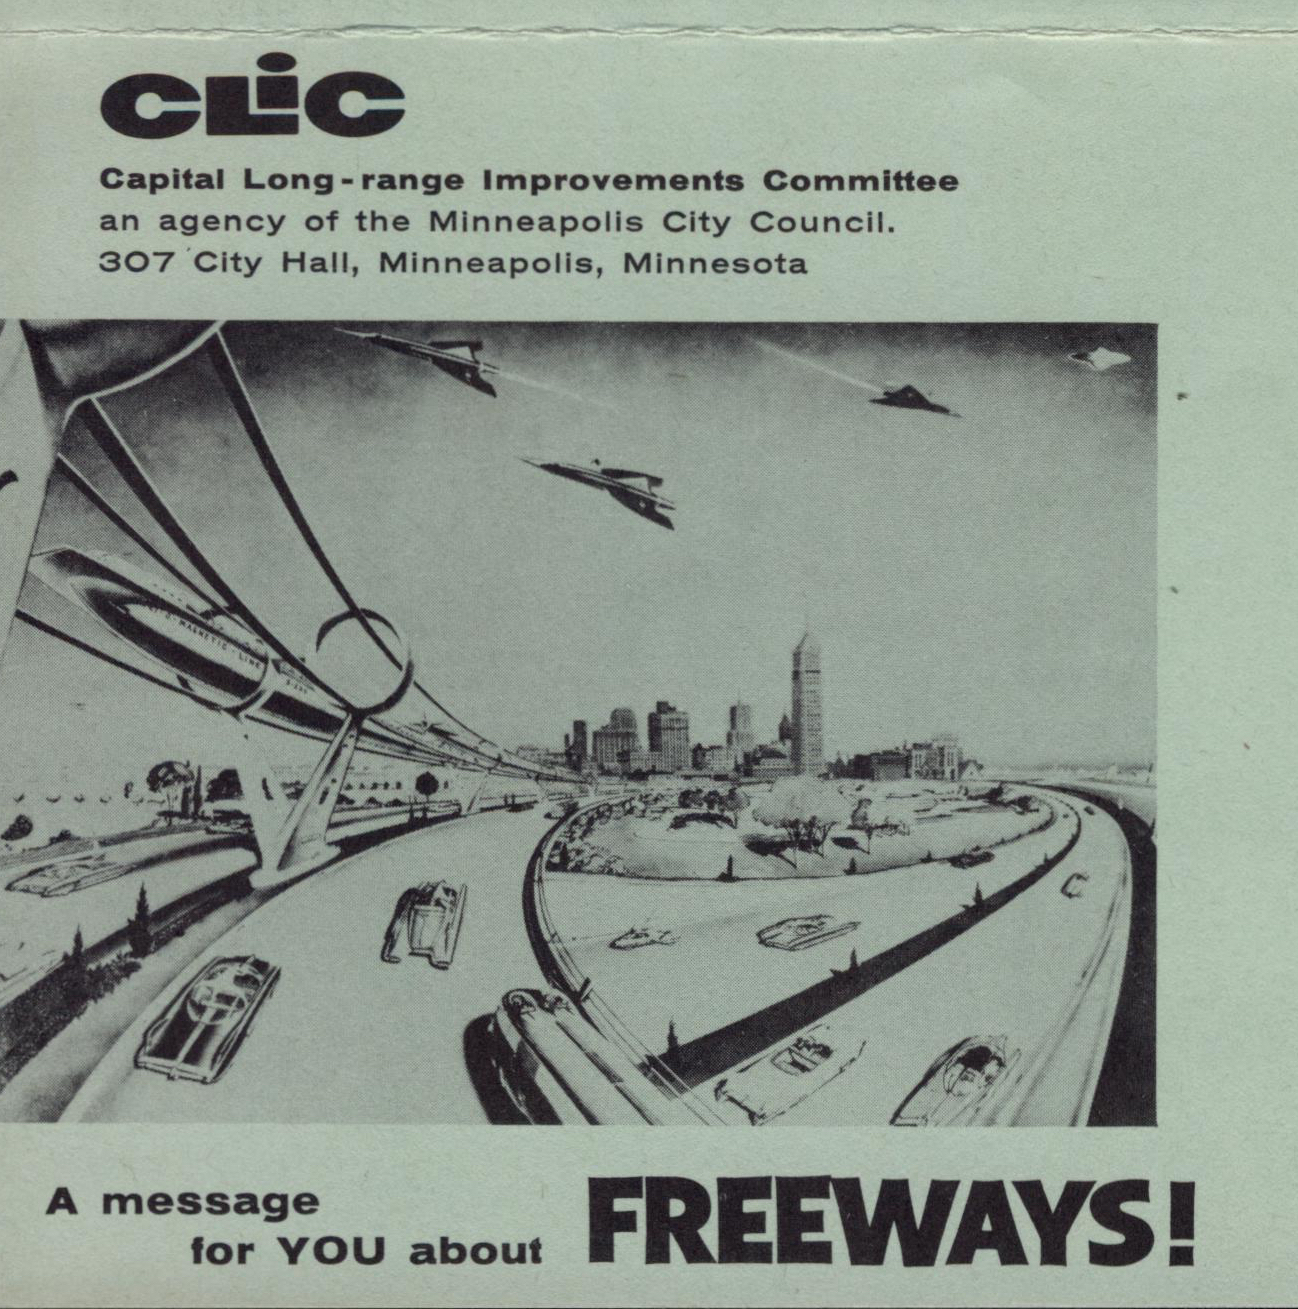 A MESSAGE FOR YOU ABOUT FREEWAYS